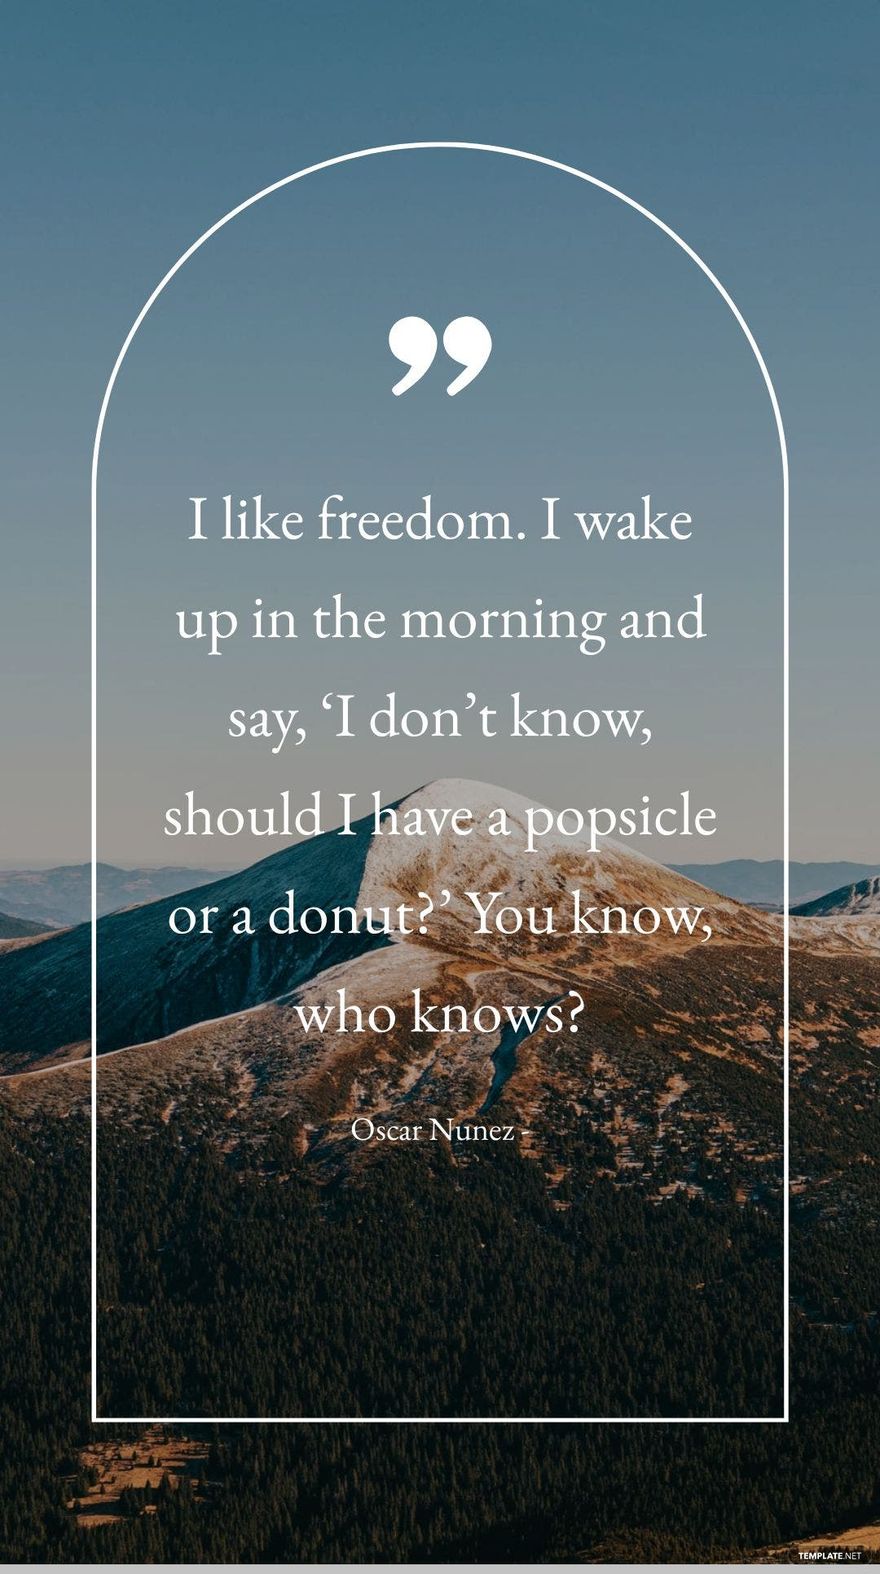 Oscar Nunez - I like freedom. I wake up in the morning and say, ‘I don’t know, should I have a popsicle or a donut?’ You know, who knows?